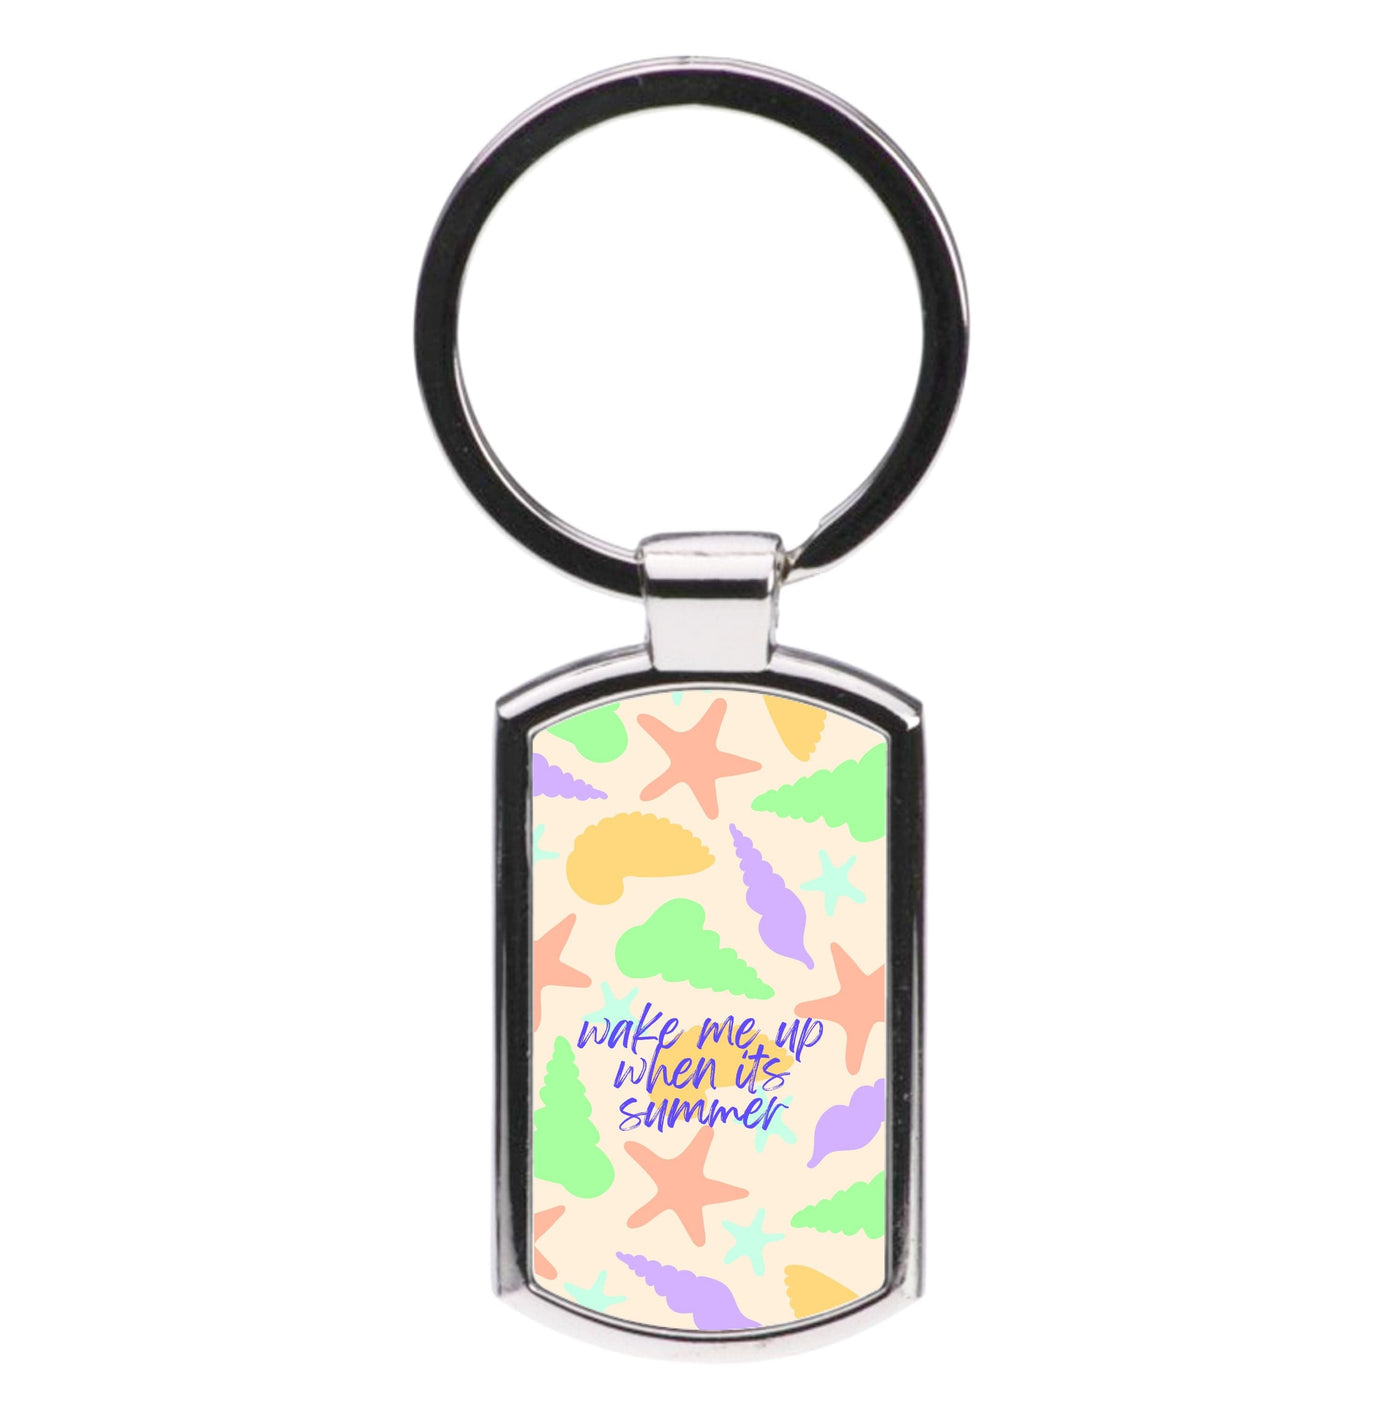 Wake Me Up When It's Summer - Summer Luxury Keyring